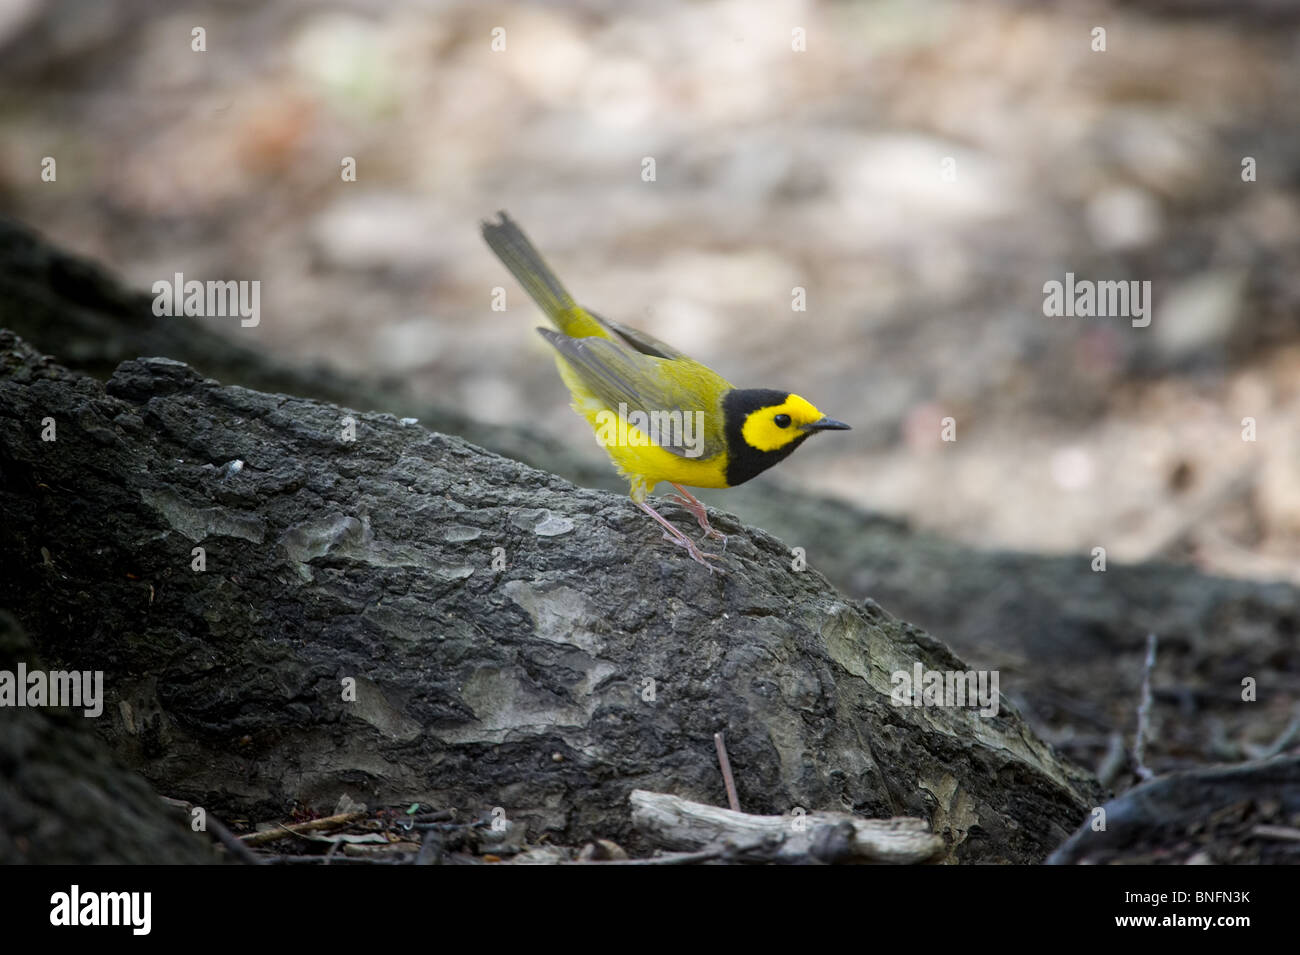 Adult Male Hooded Warbler Perched Stock Photo